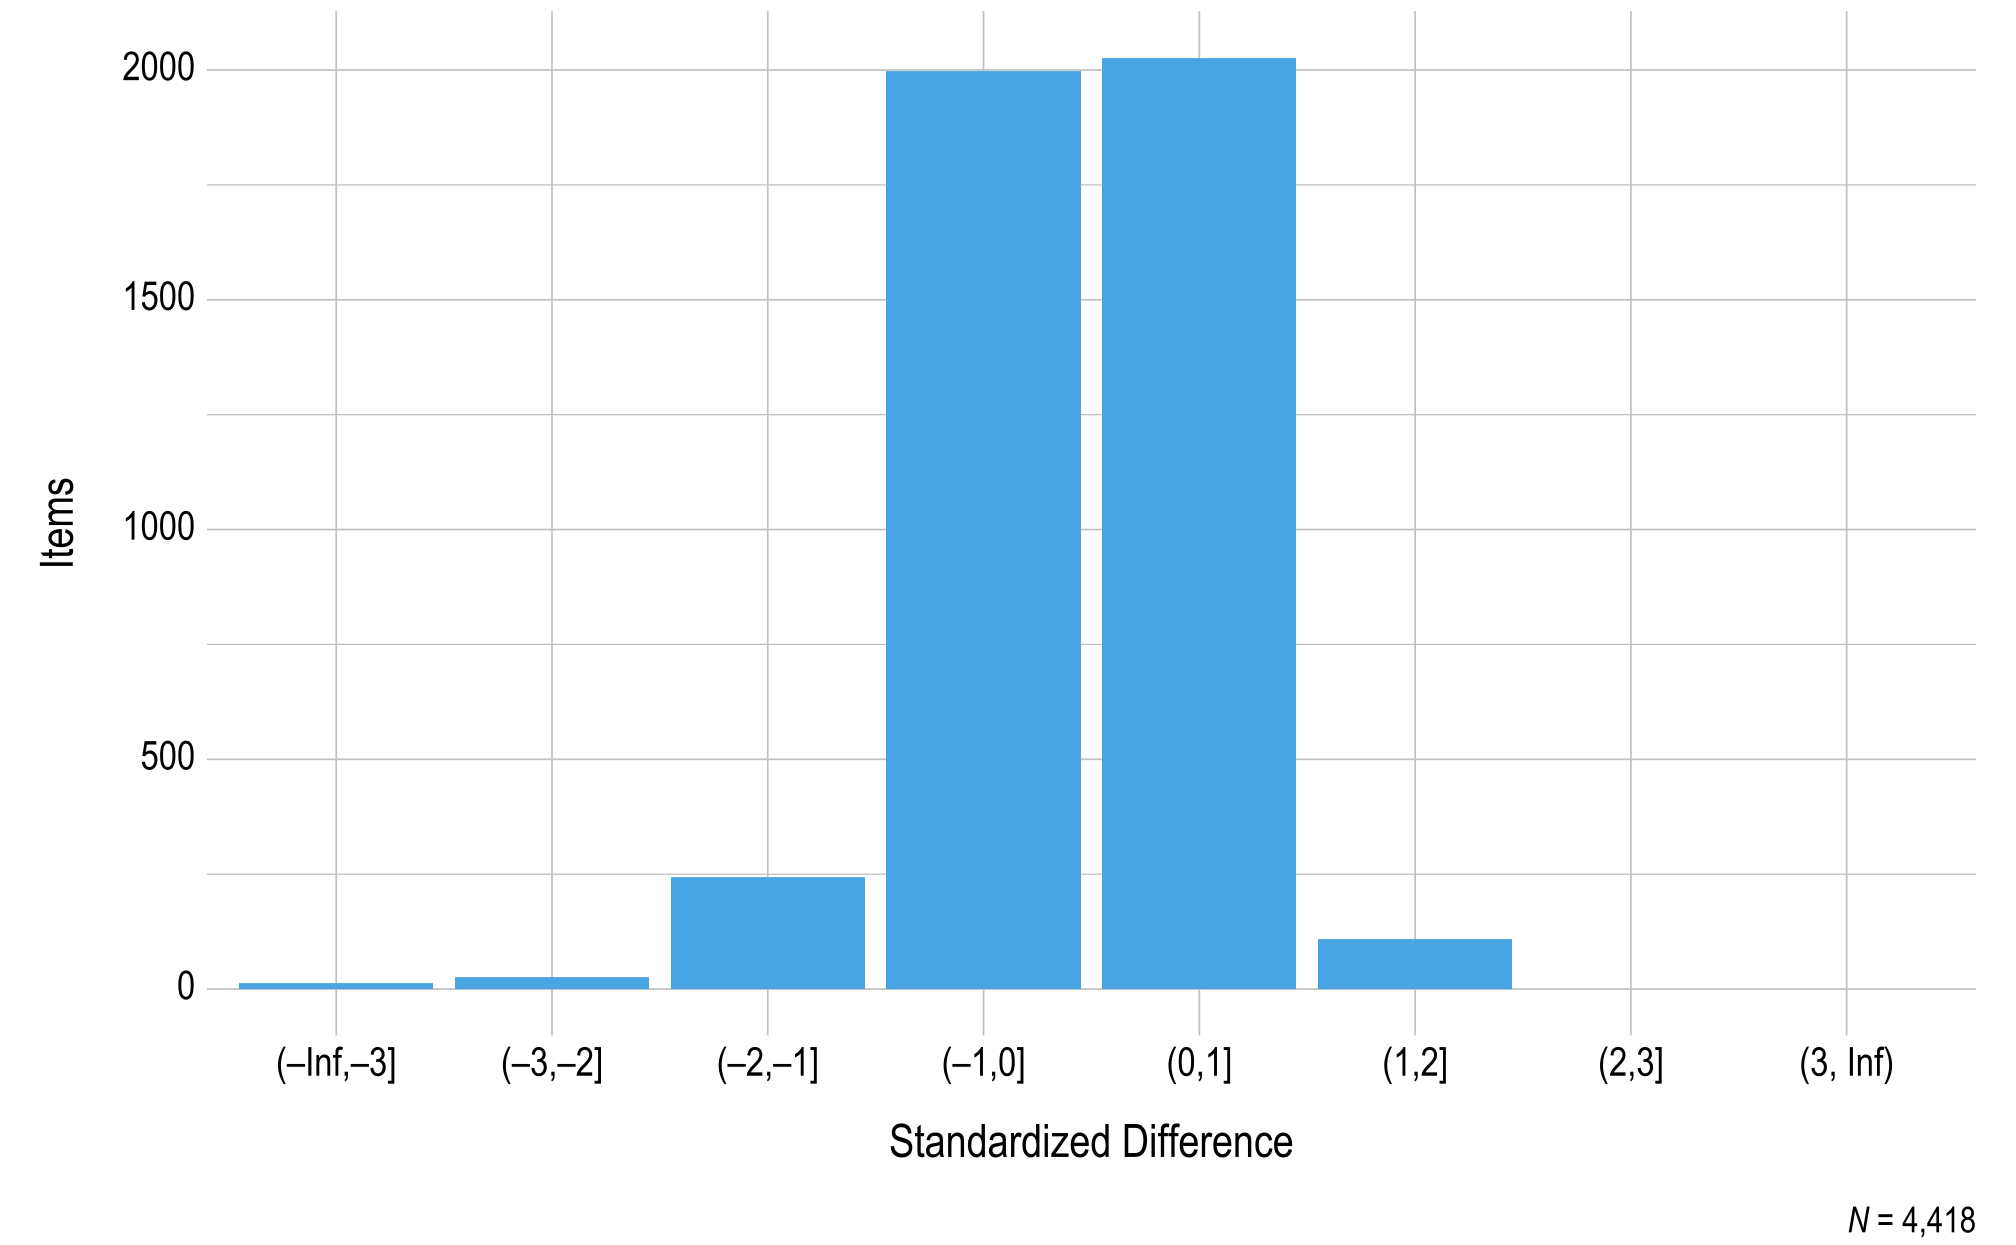 This figure contains a histogram displaying standardized difference on the x-axis and the number of mathematics operational items on the y-axis.